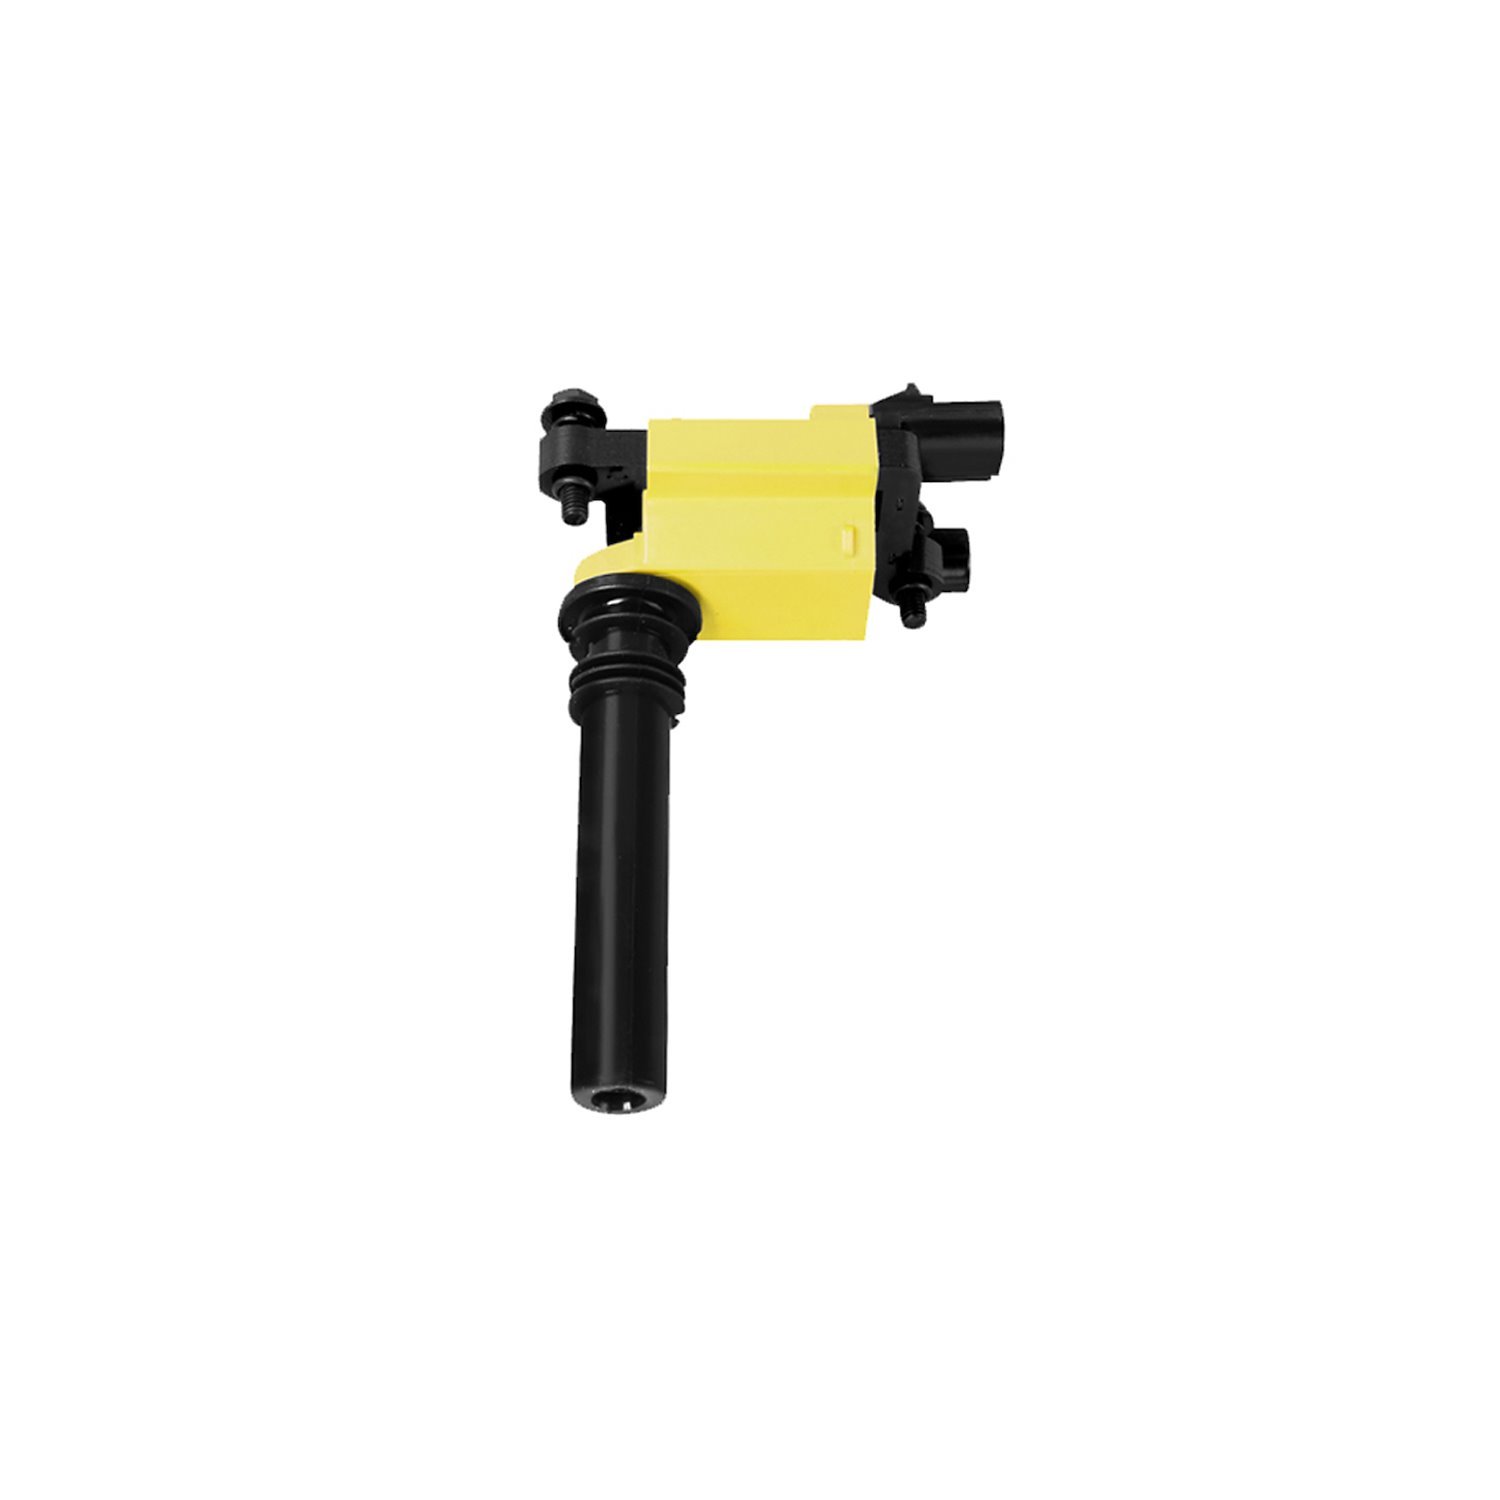 High-Performance Ignition Coil for Dodge Ram 1500/Durango/Chrysler 300/Jeep 5.7L [Yellow]